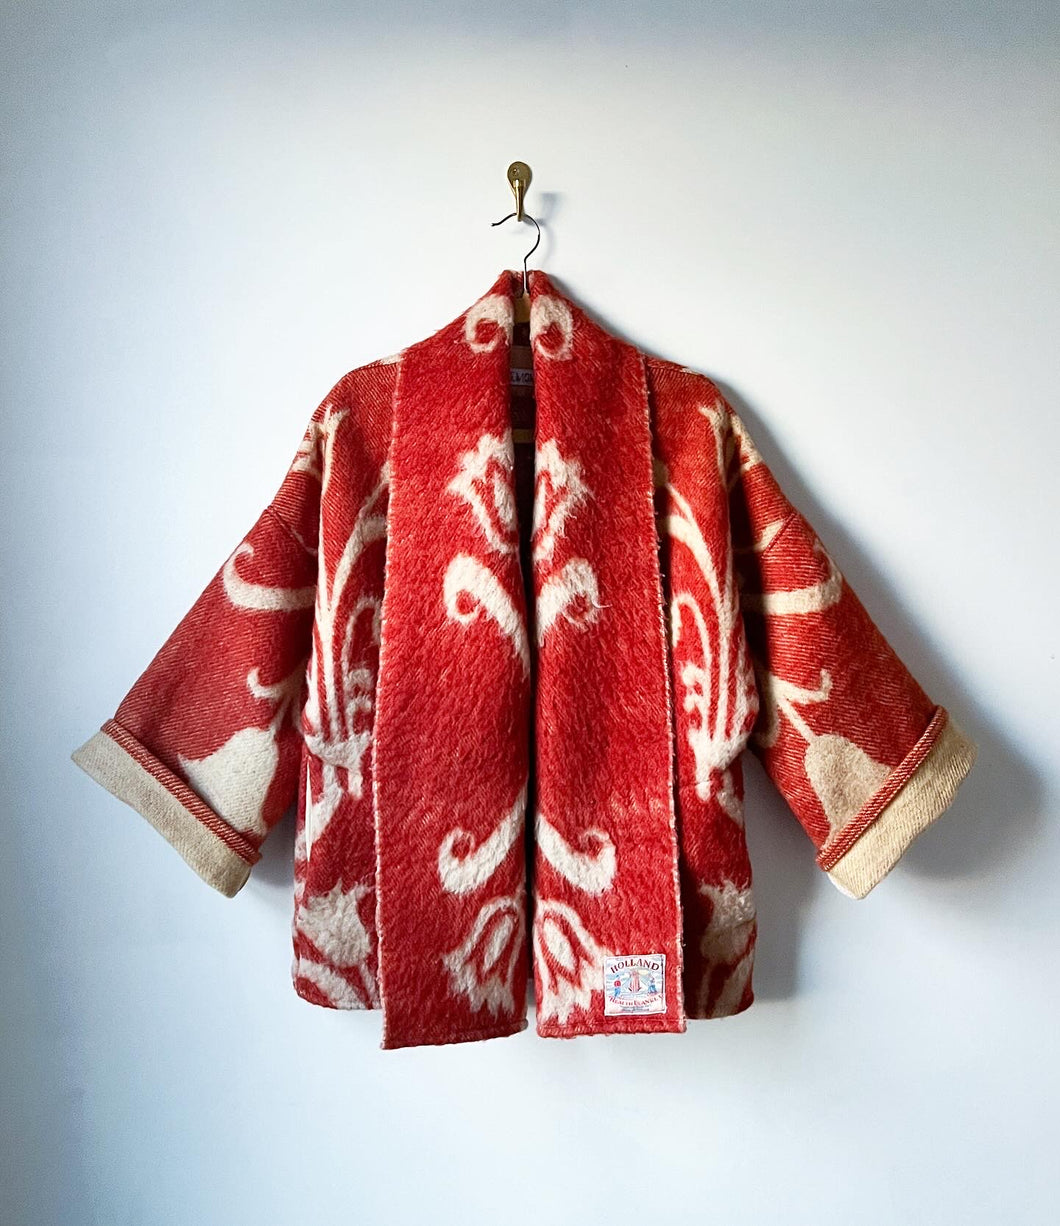 One-of-a-Kind: Vintage Holland Health Wool Blanket Cocoon Coat (flexible sizing)